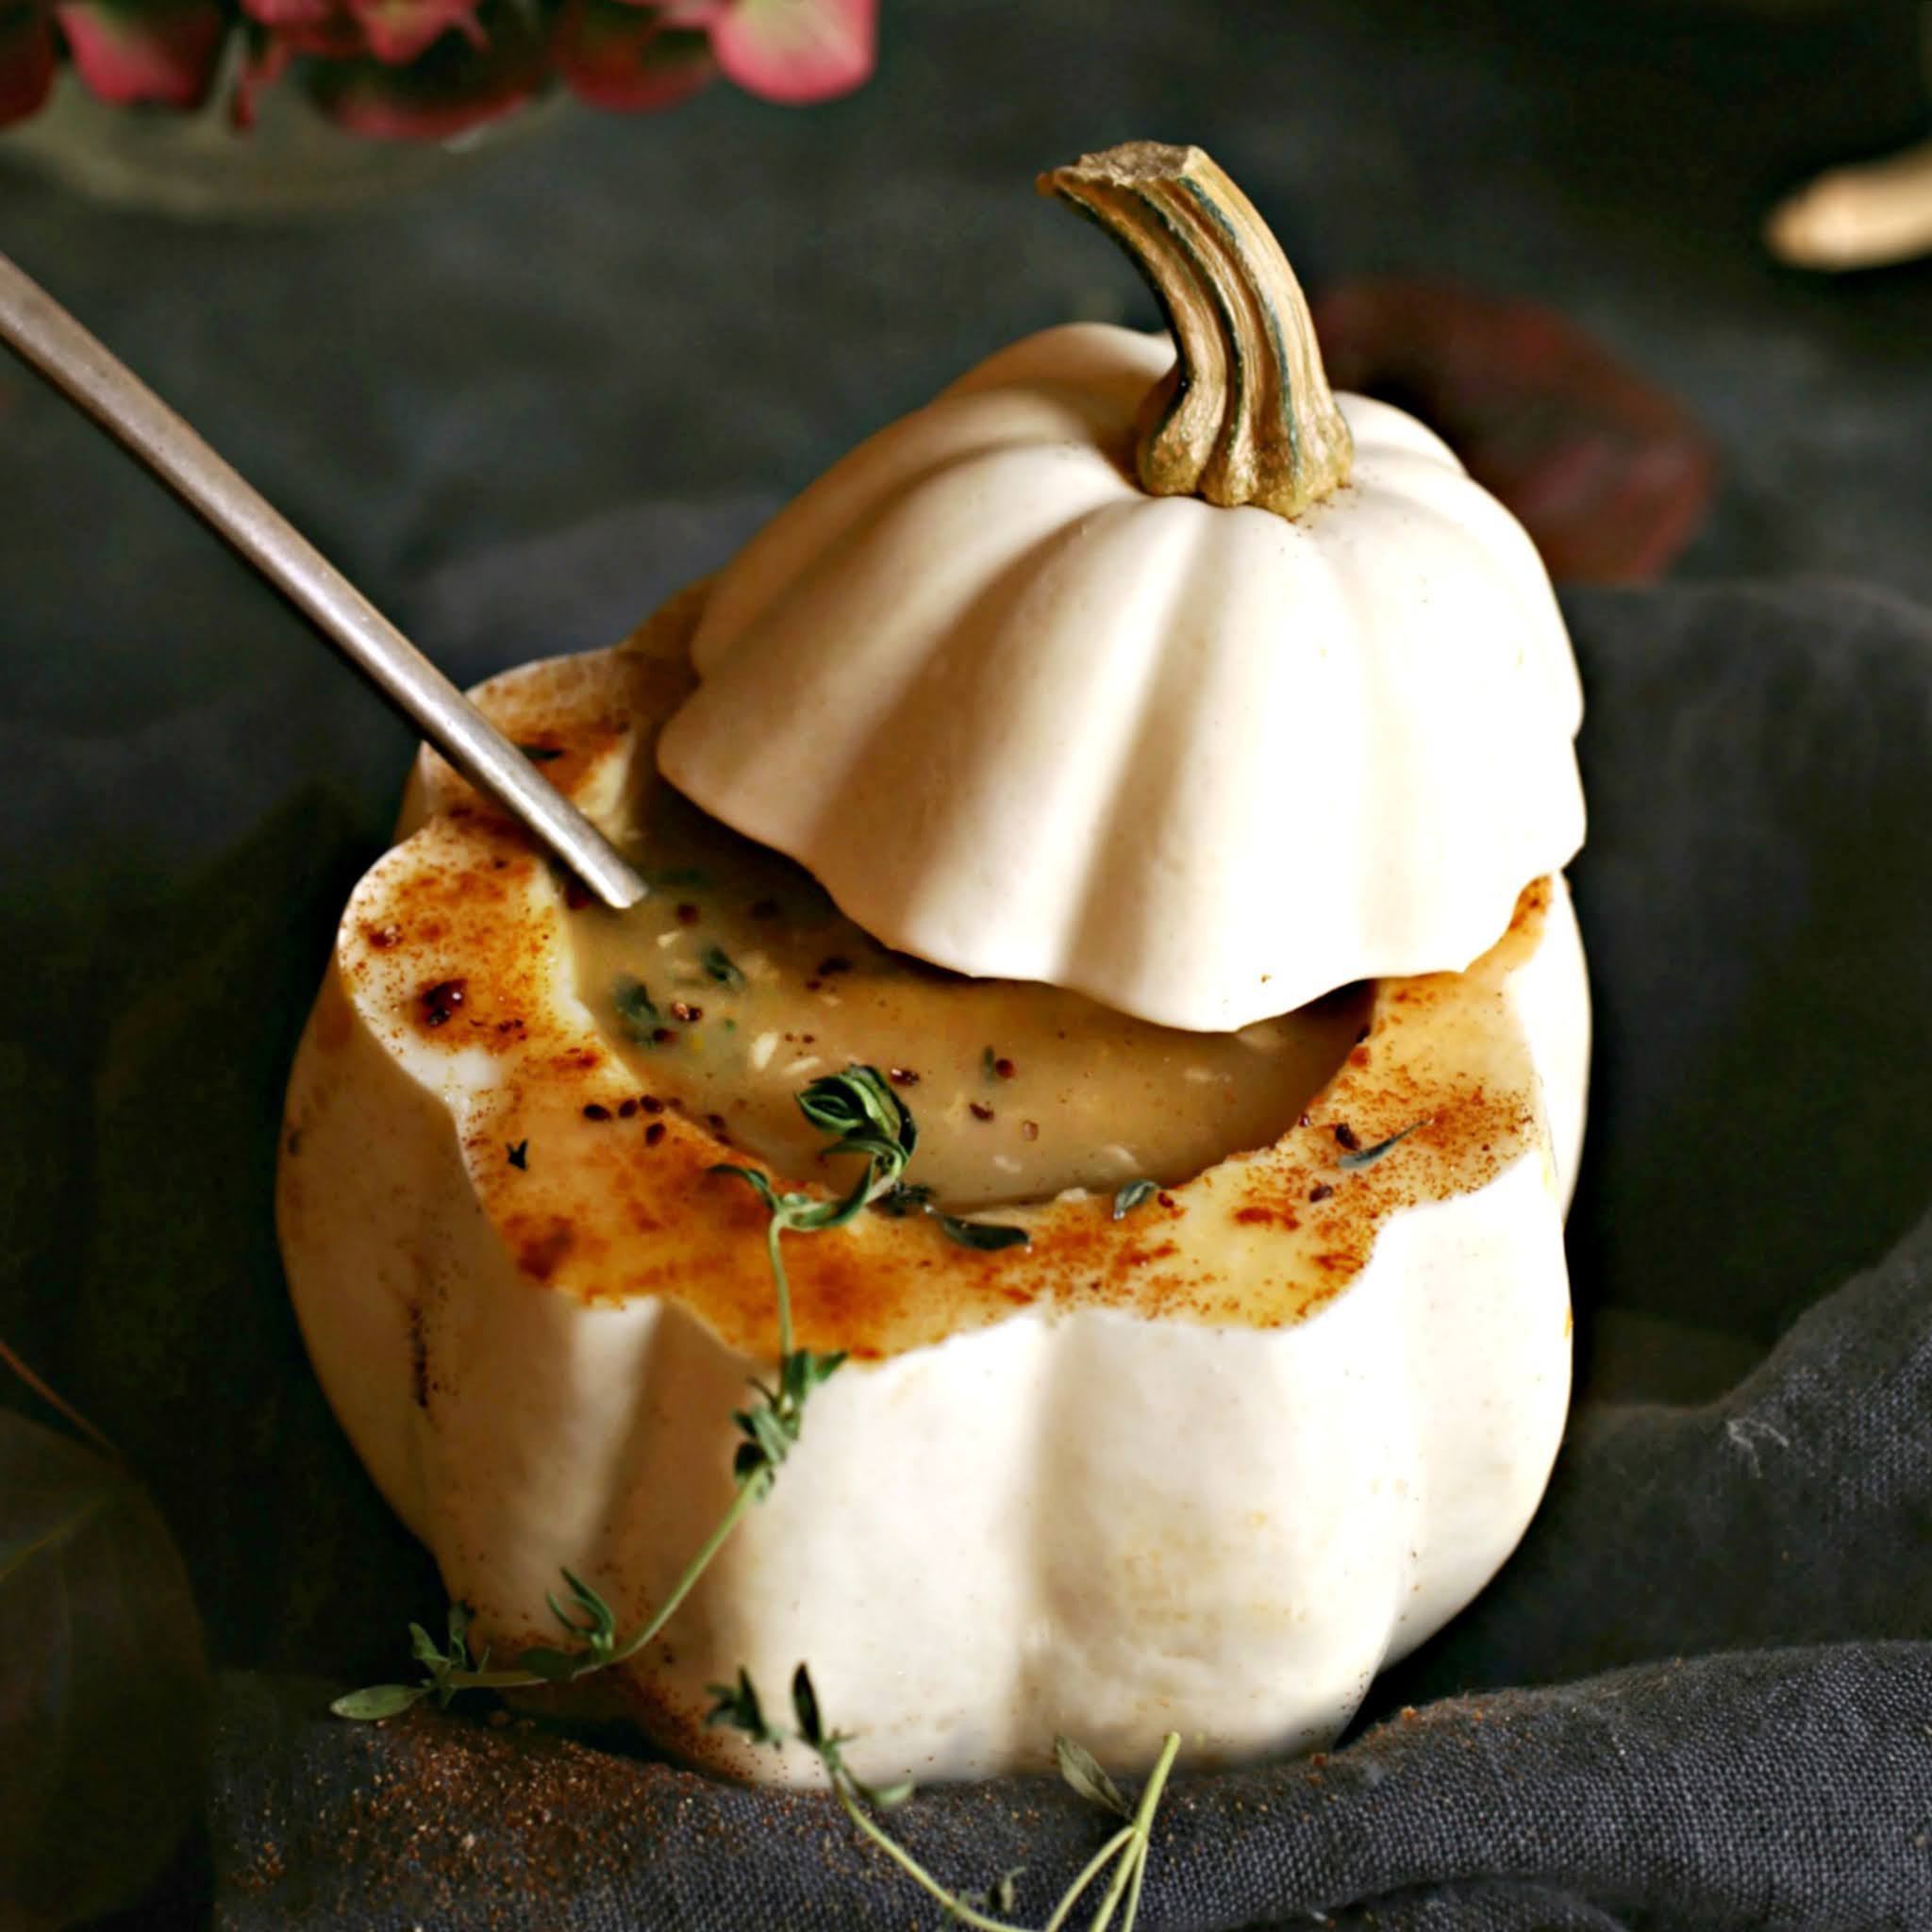 Recipe for a creamy acorn squash and potato soup, flavored with cumin and fresh thyme.